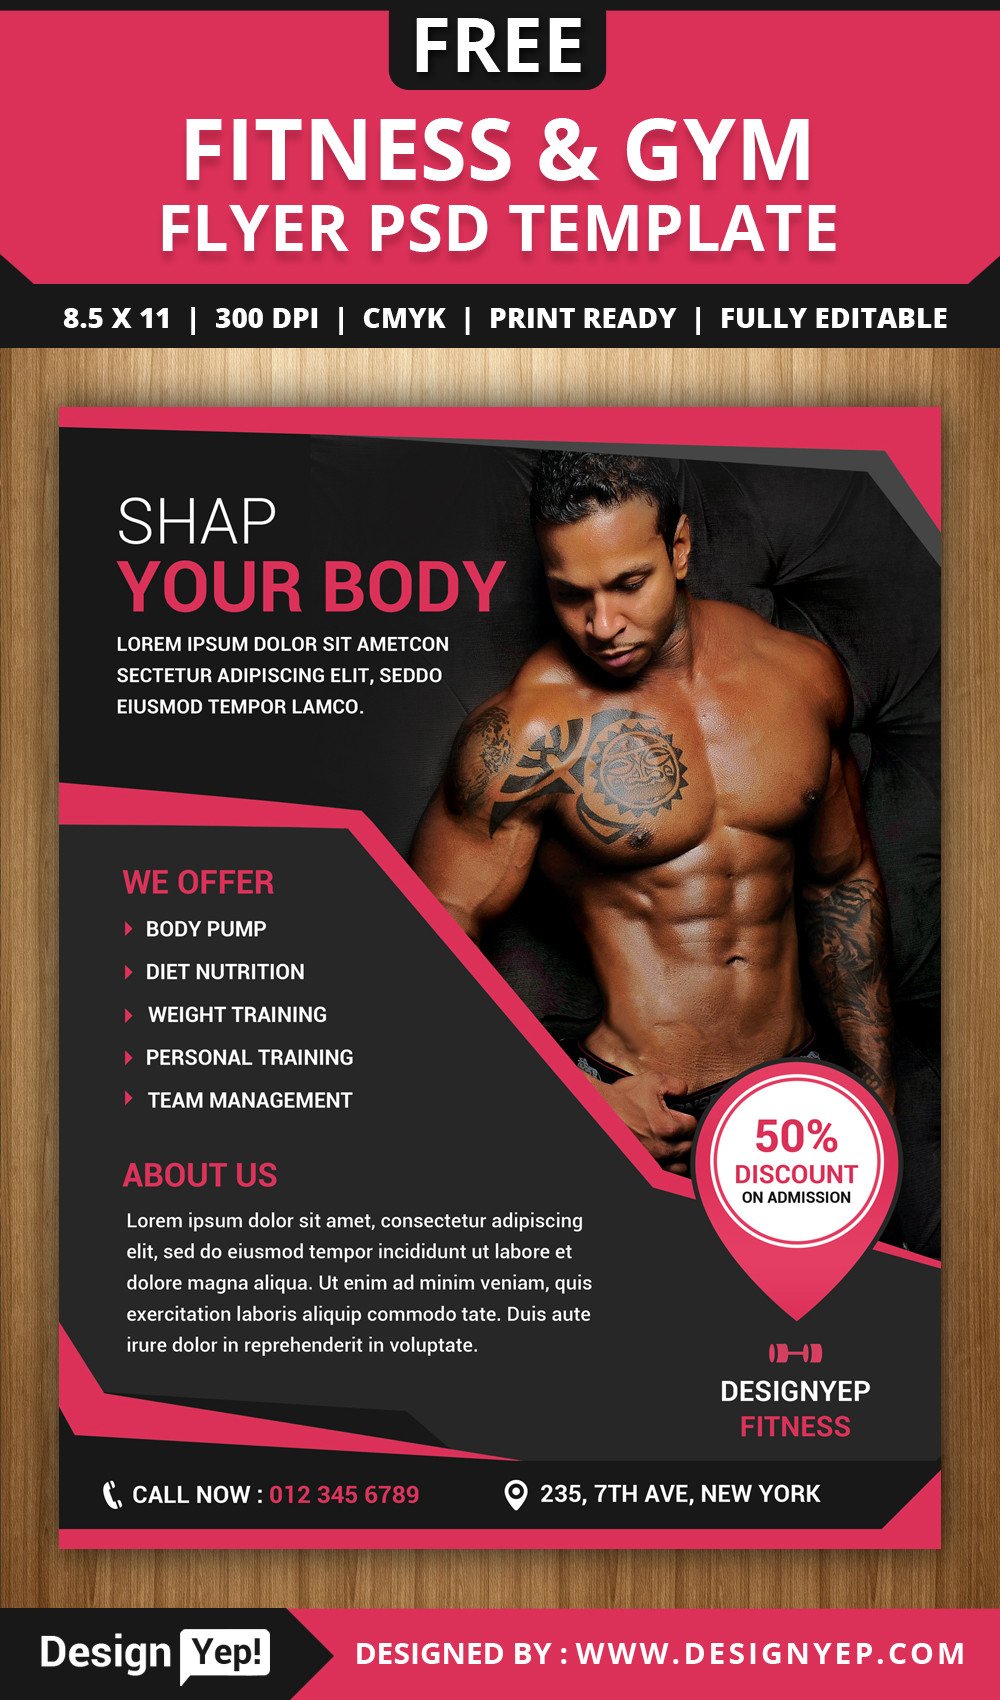 Fitness Flyer Template Free Free Fitness and Gym Flyer Psd Template Designyep